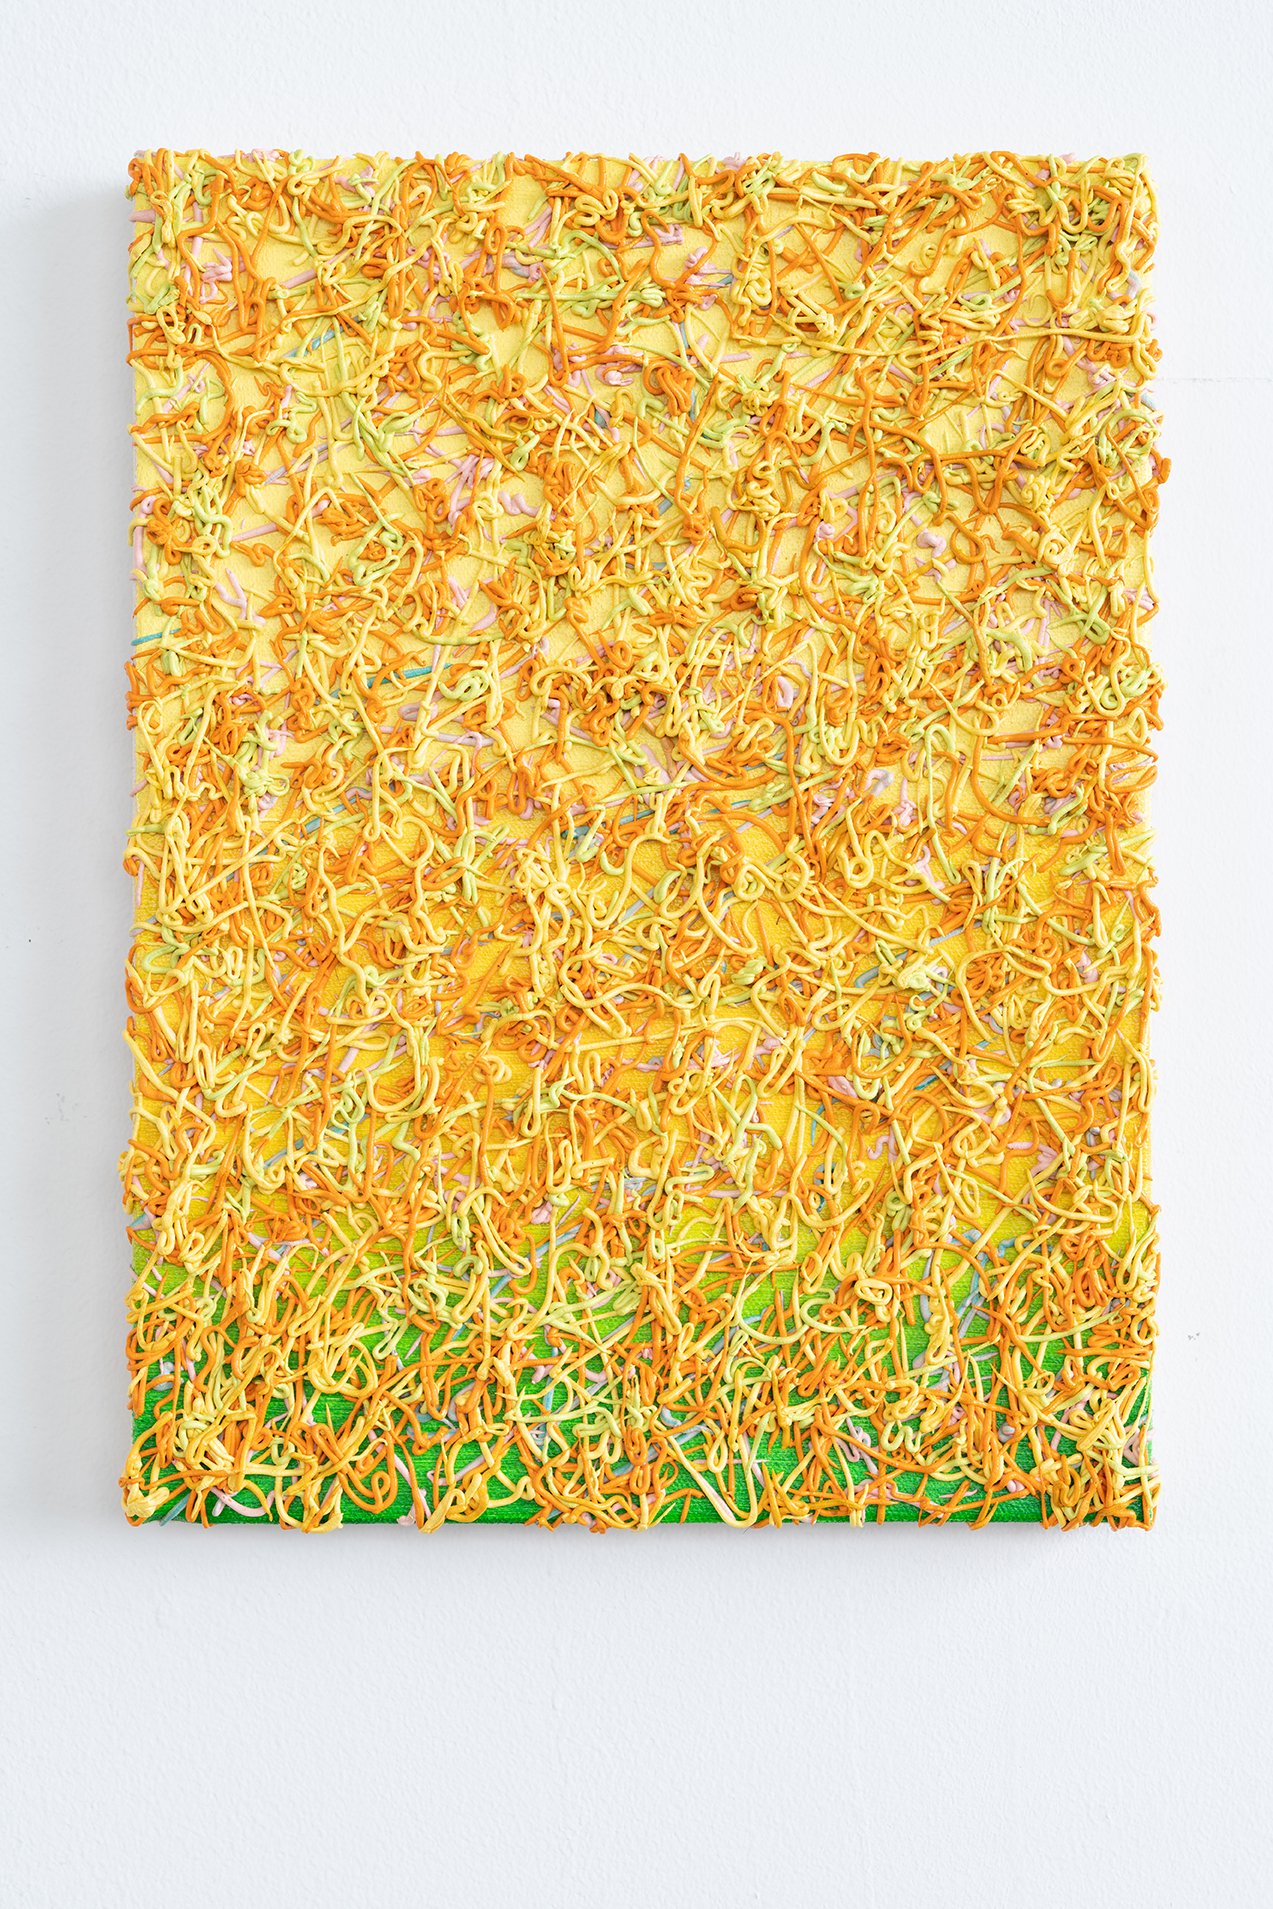   Philip Hardy   Noodle Painting (Yellow)  2018  Photo Rob Ventura 